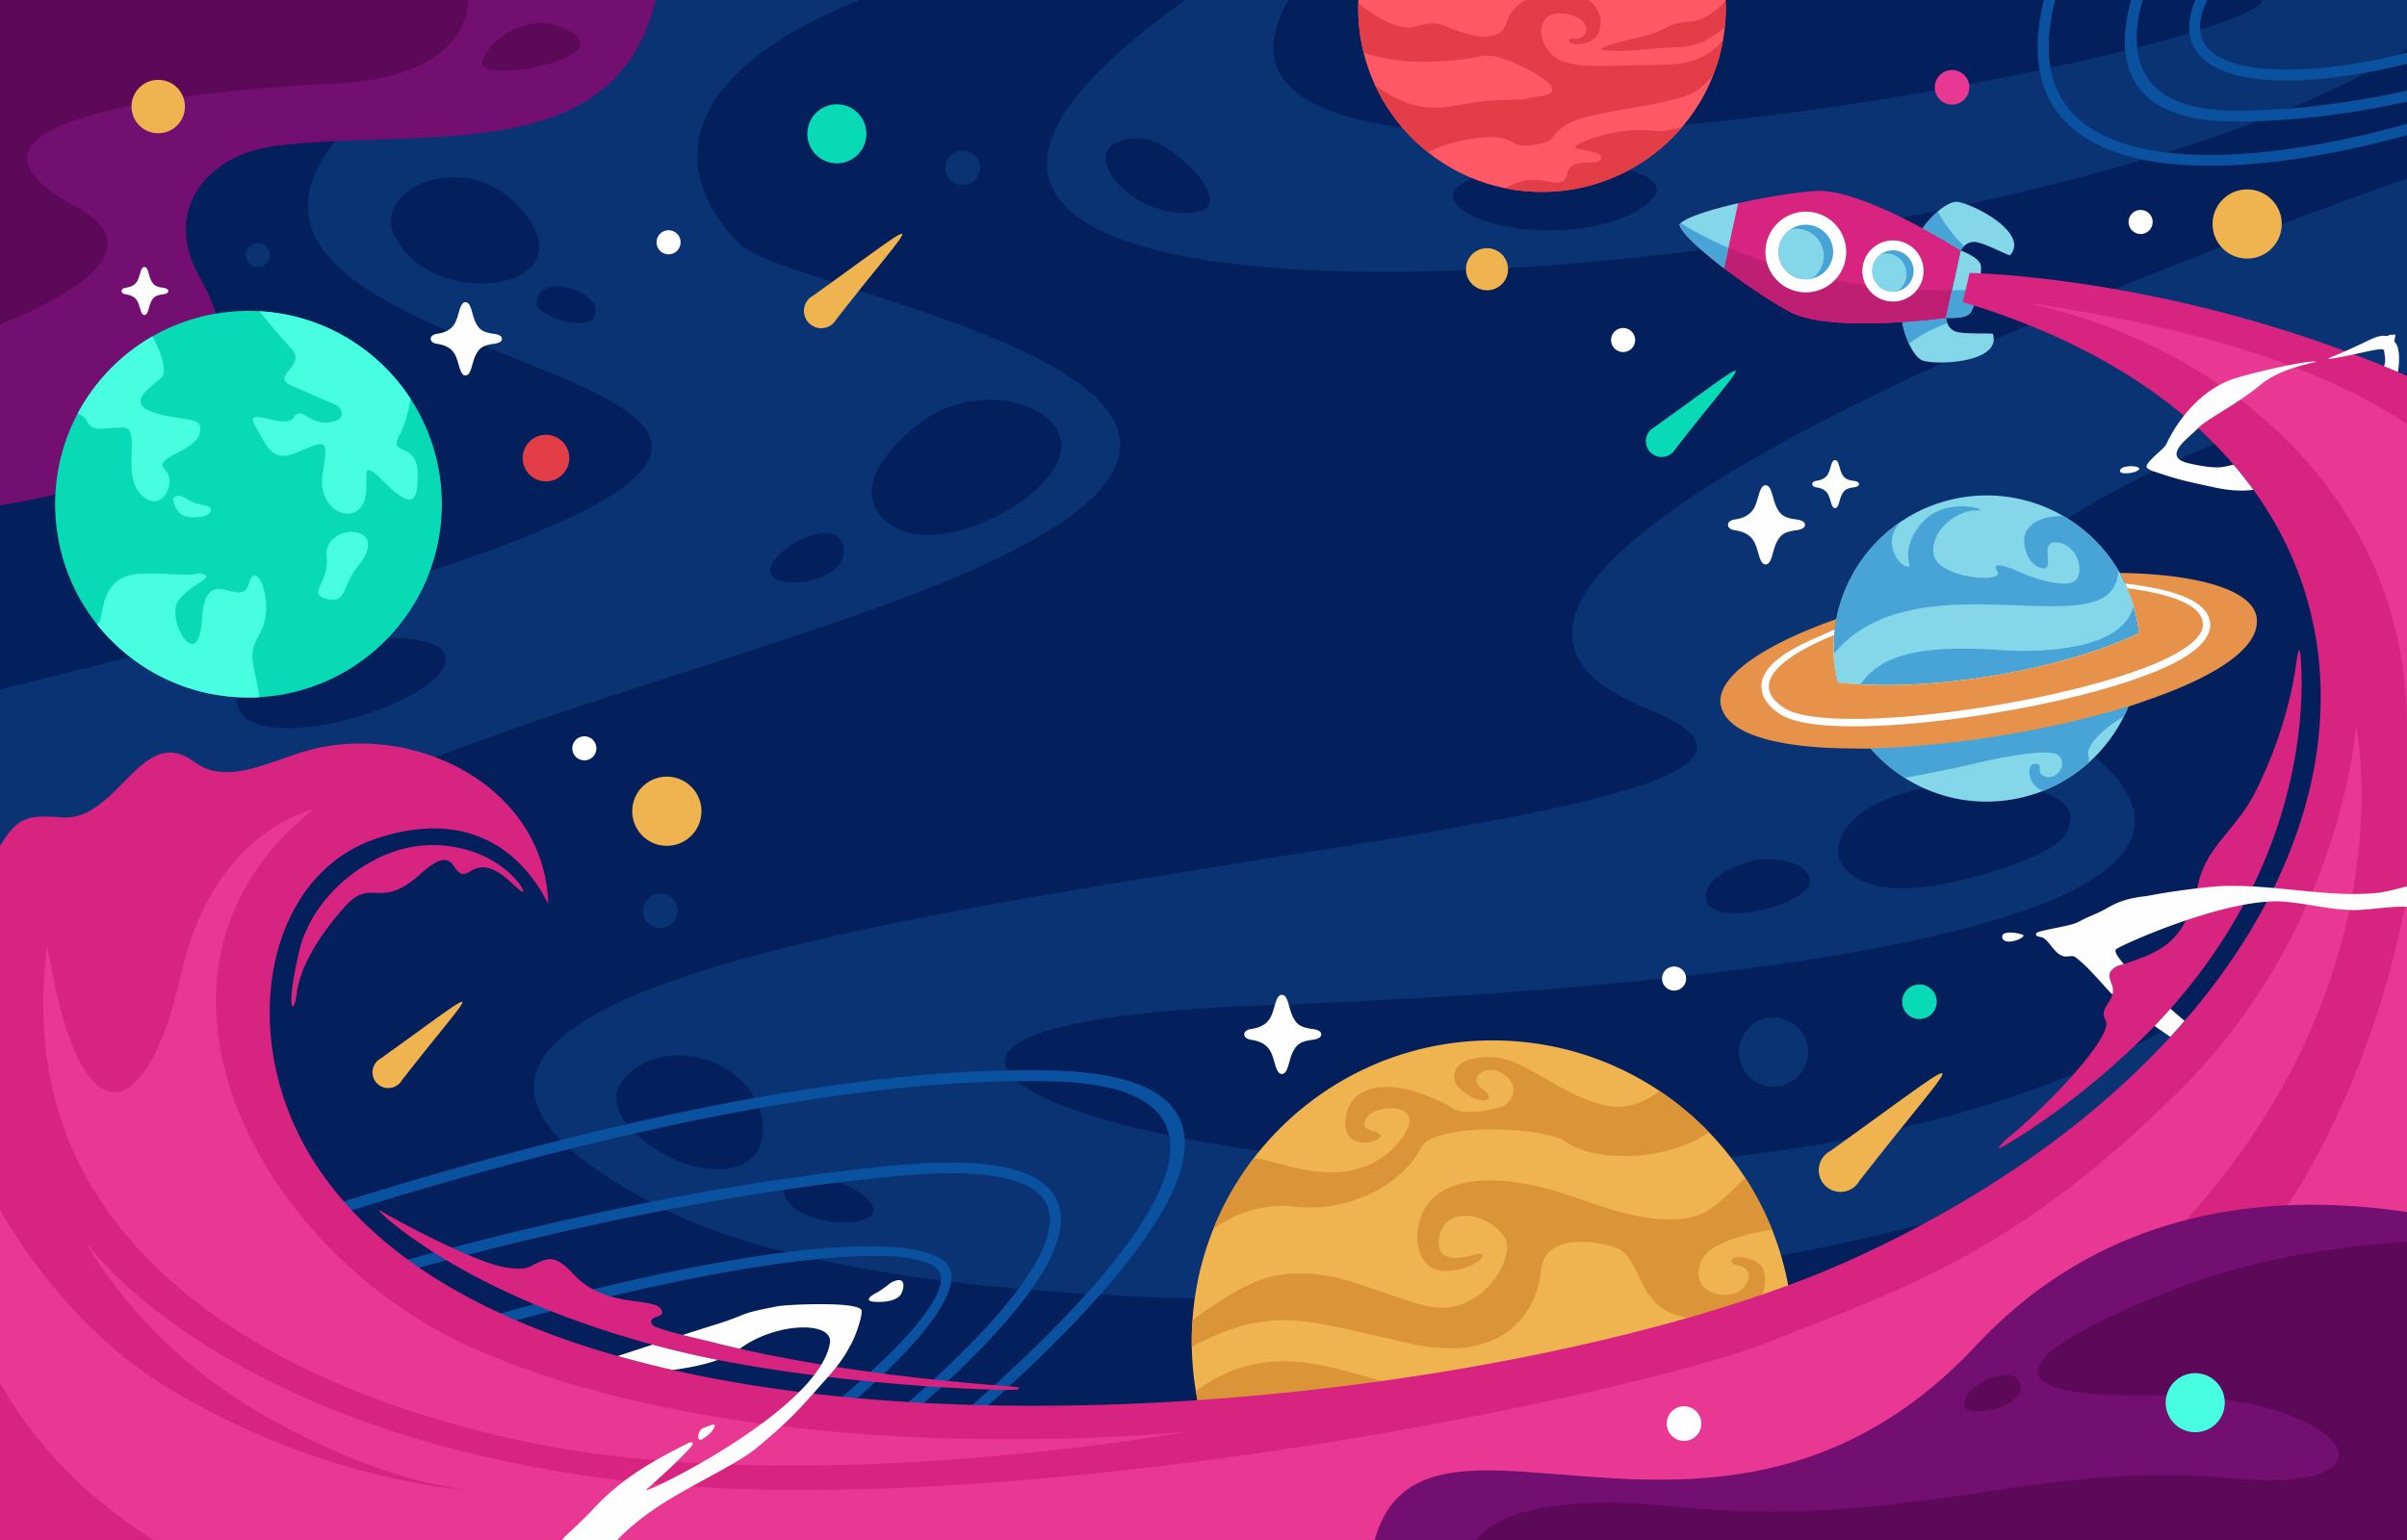 Details 100 space background vector